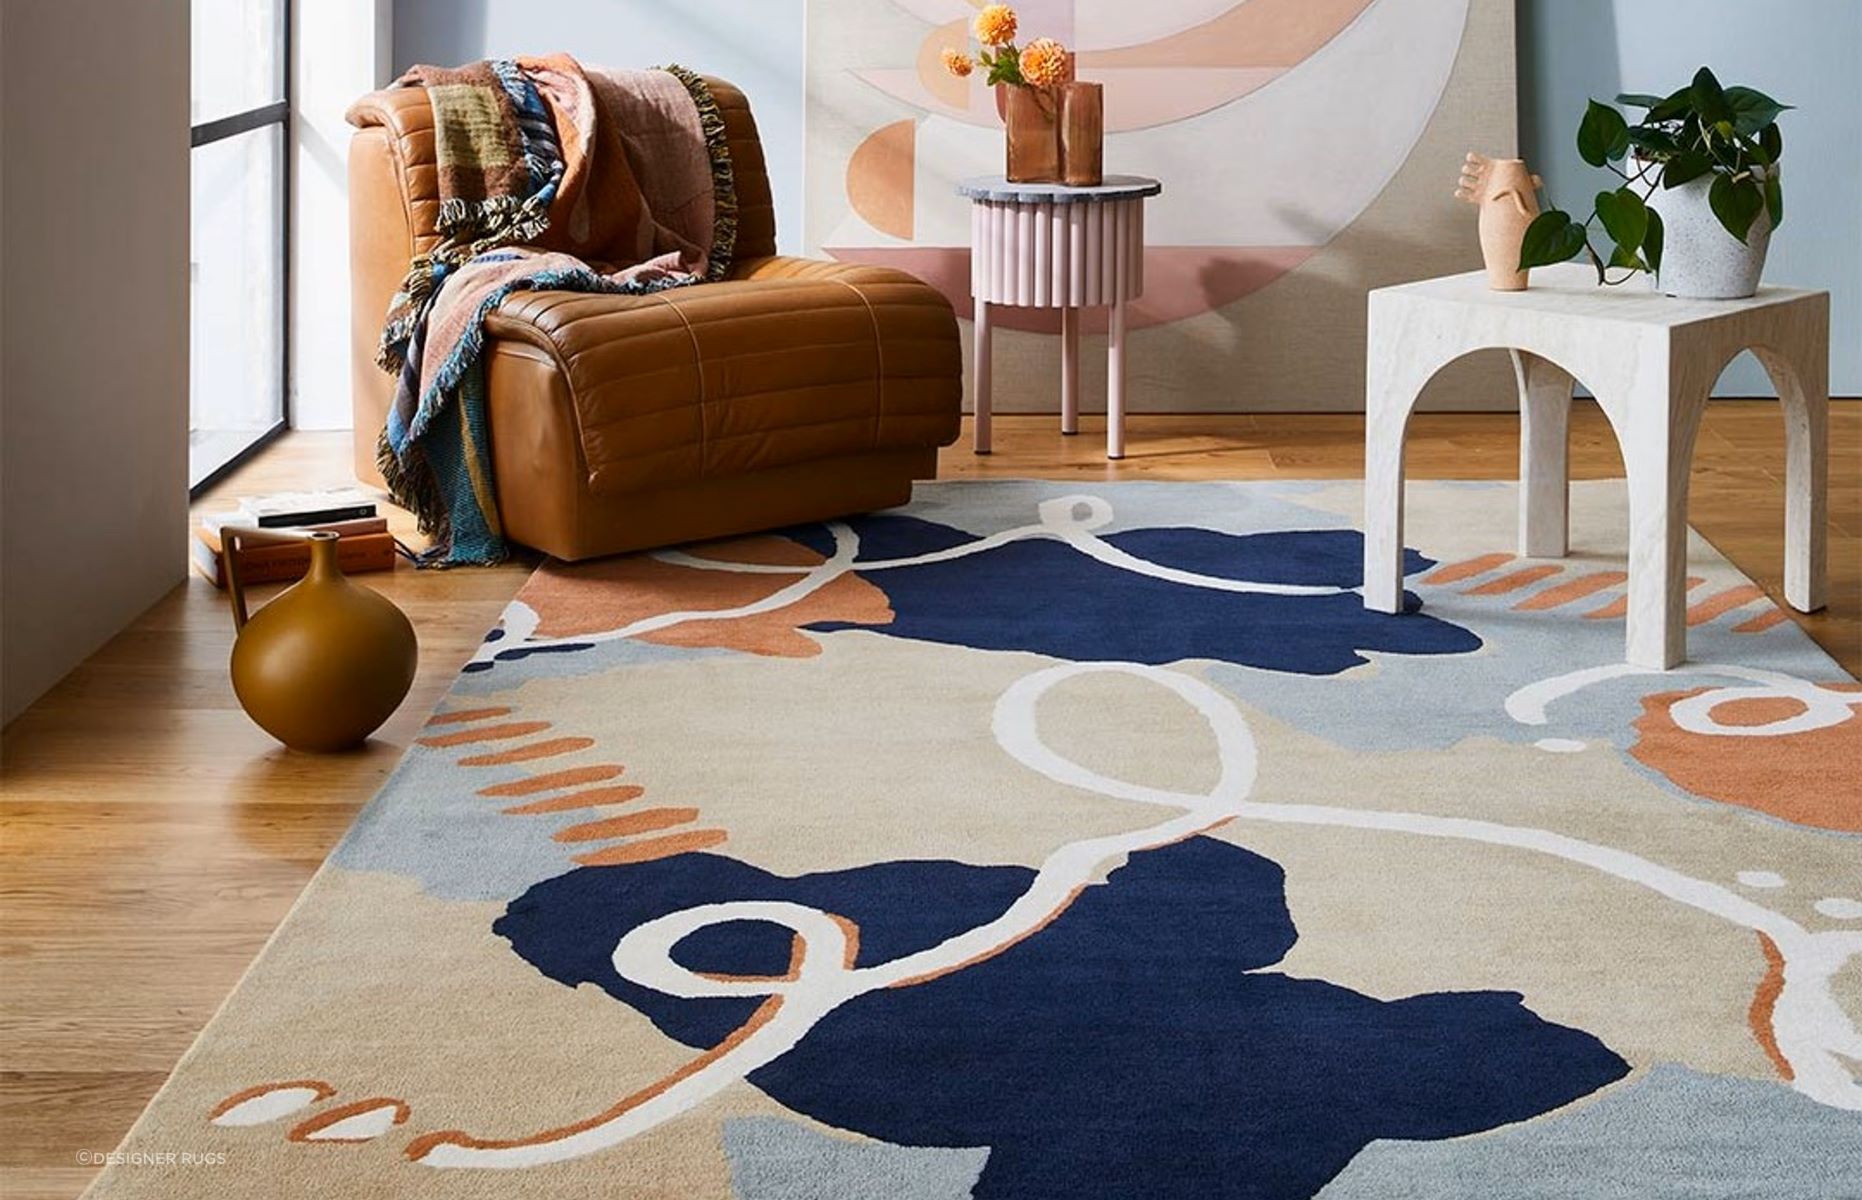 What Are The Different Types Of Rugs